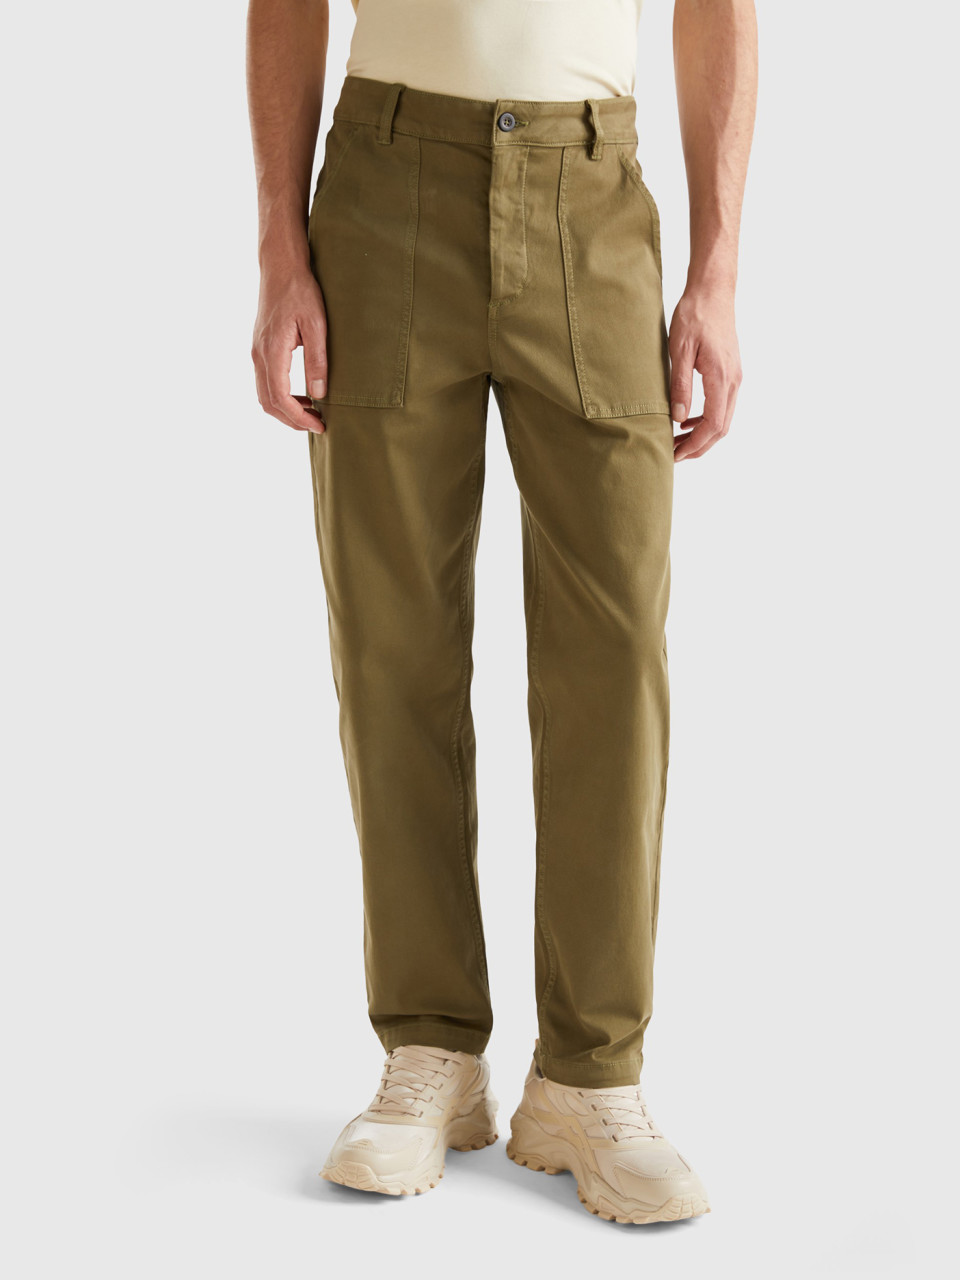 Benetton, Straight Trousers With Low Crotch, Military Green, Men